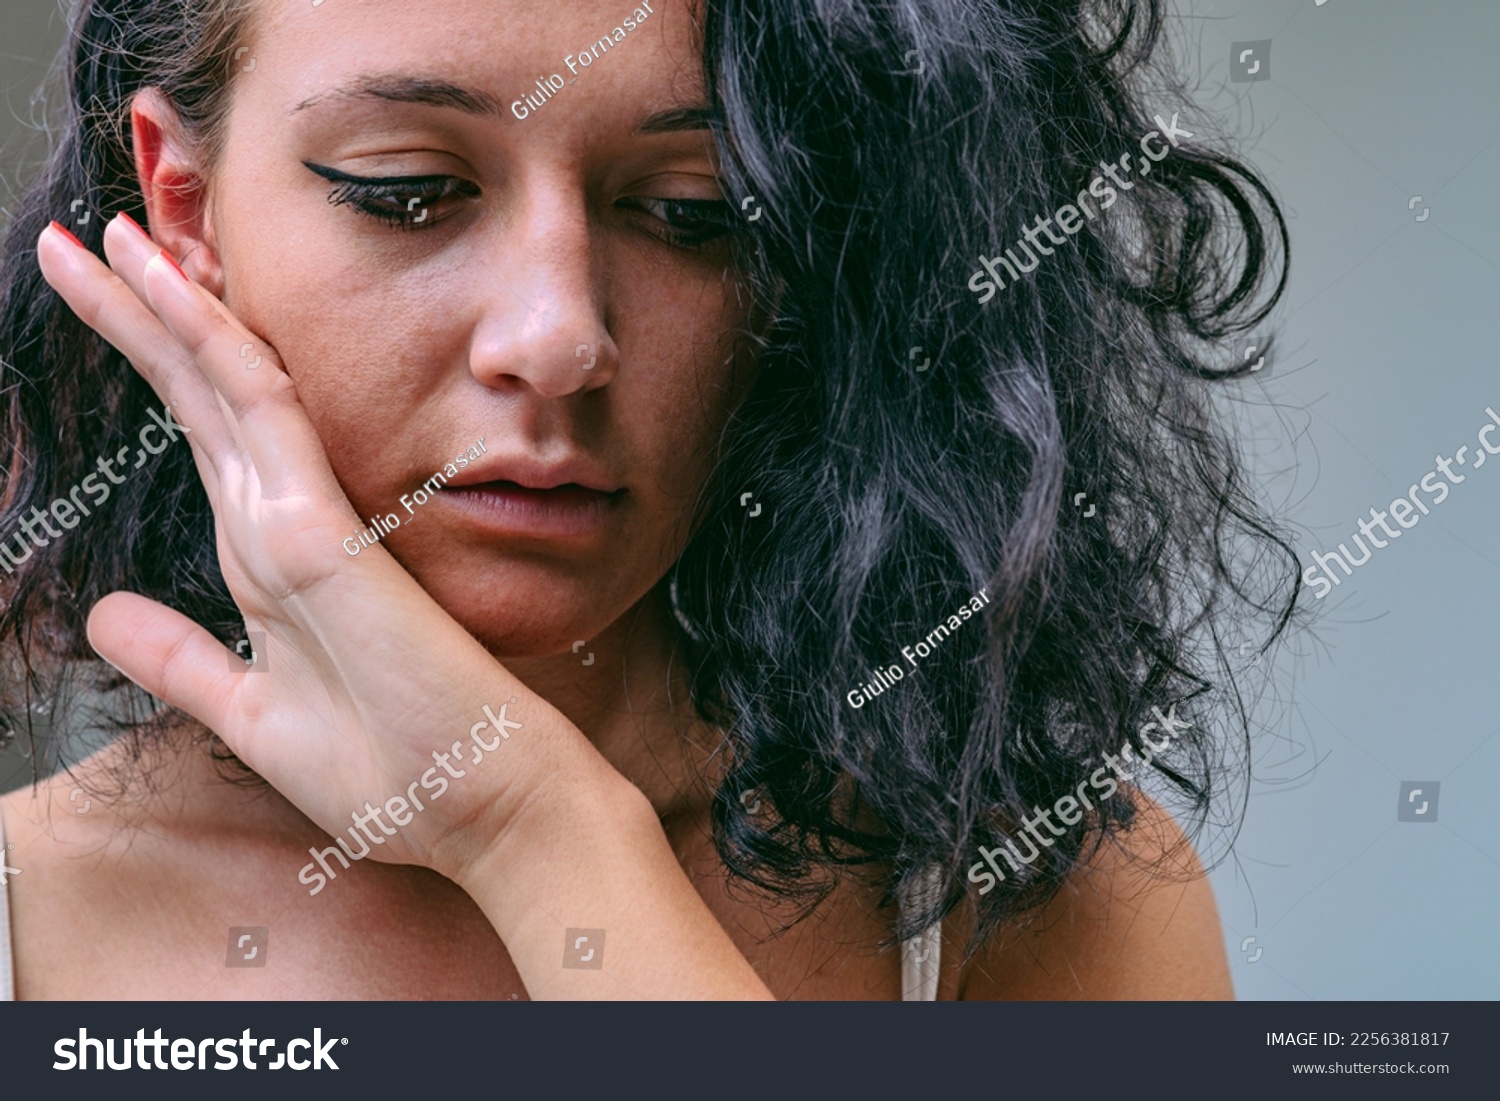 Frontal close-up portrait of young woman bringing her hand to touch the skin of her cheek and chin with the back. She may be feeling how smooth it is, but she may be sad and afraid of a slap. #2256381817